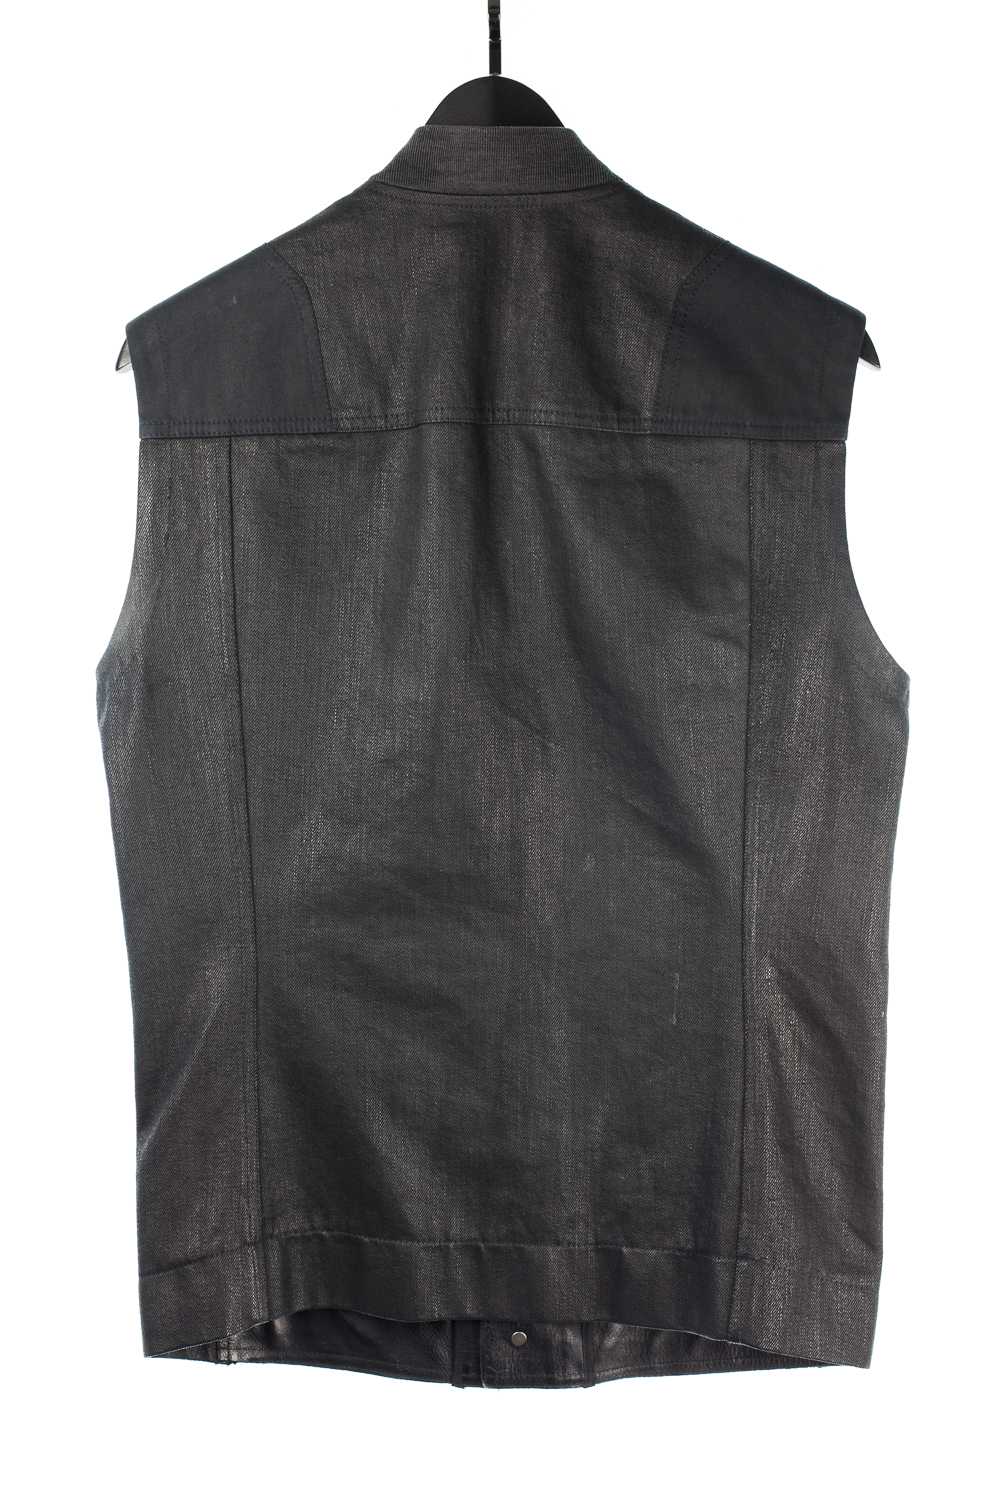 SS13 “Island” Leather/Cotton Fitted Jungle Vest - image 4